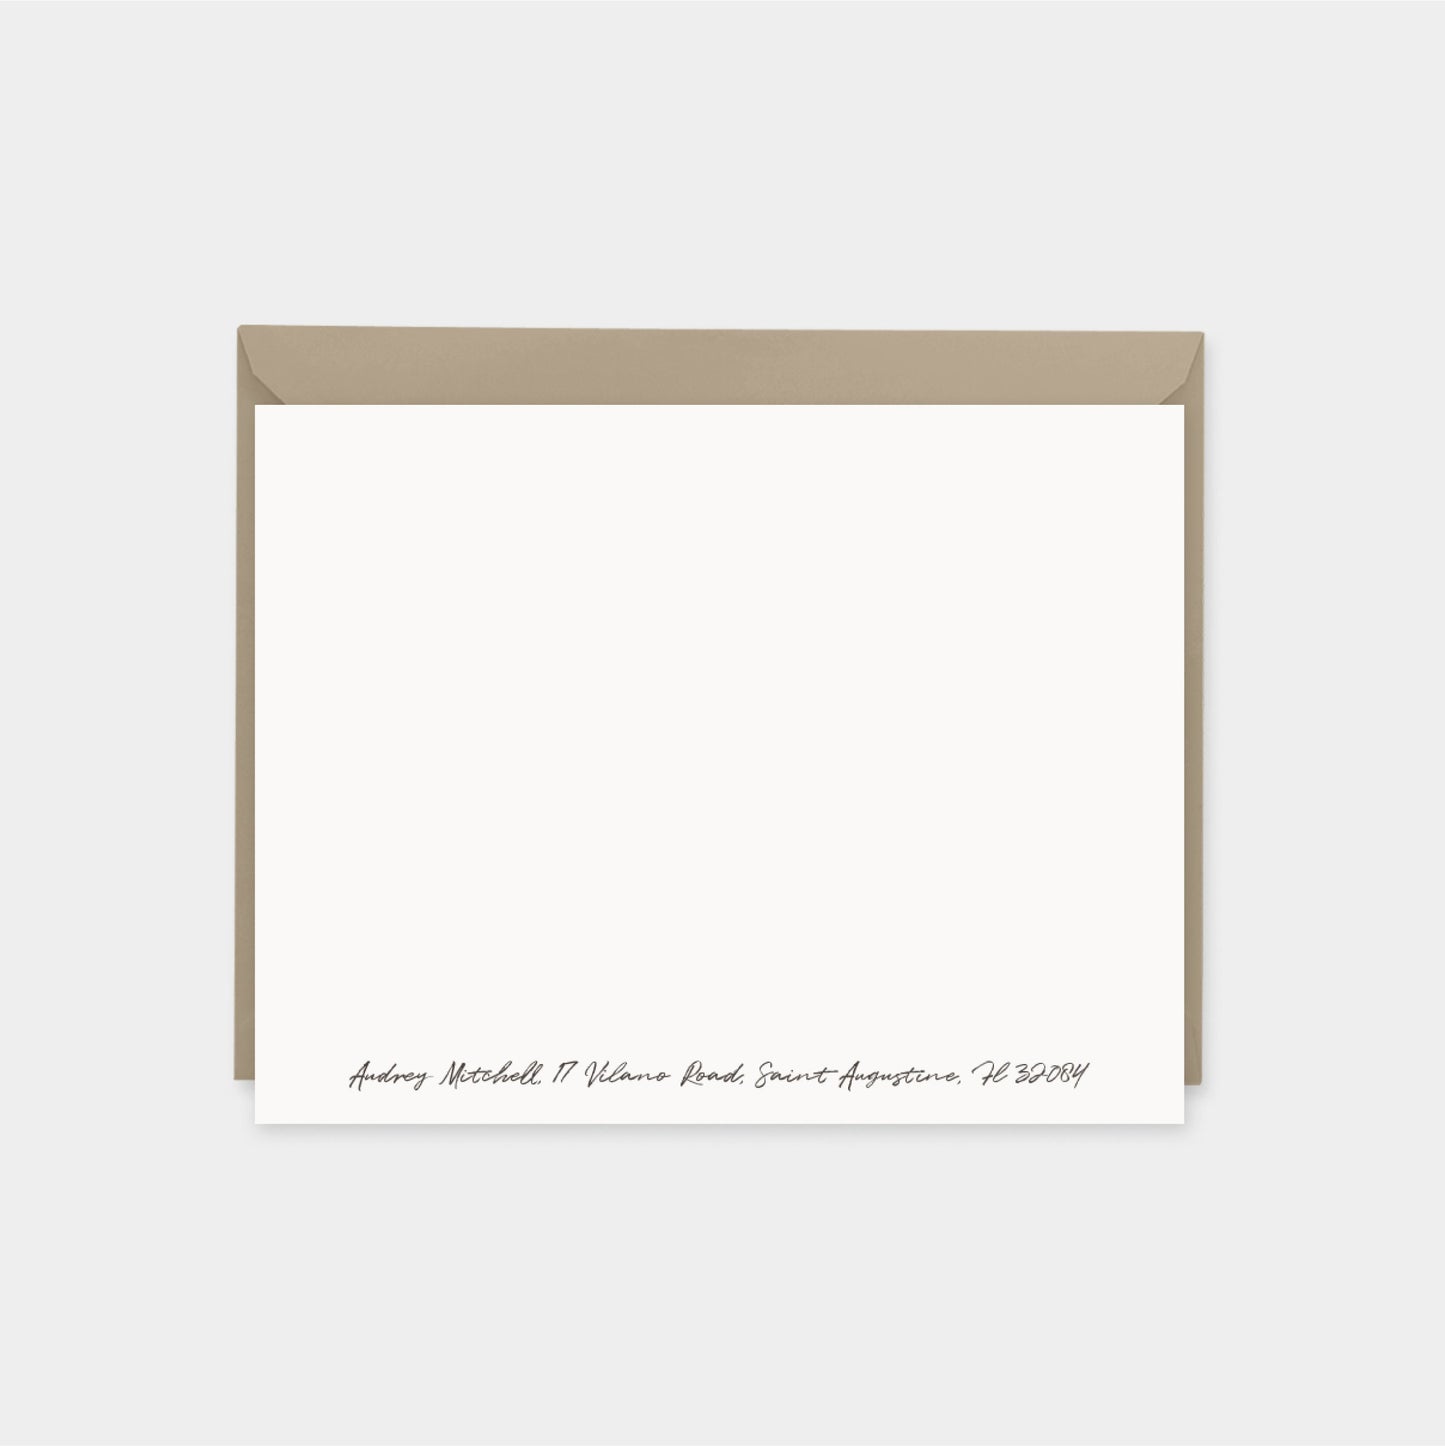 Viridian Painted Texture Note Cards,